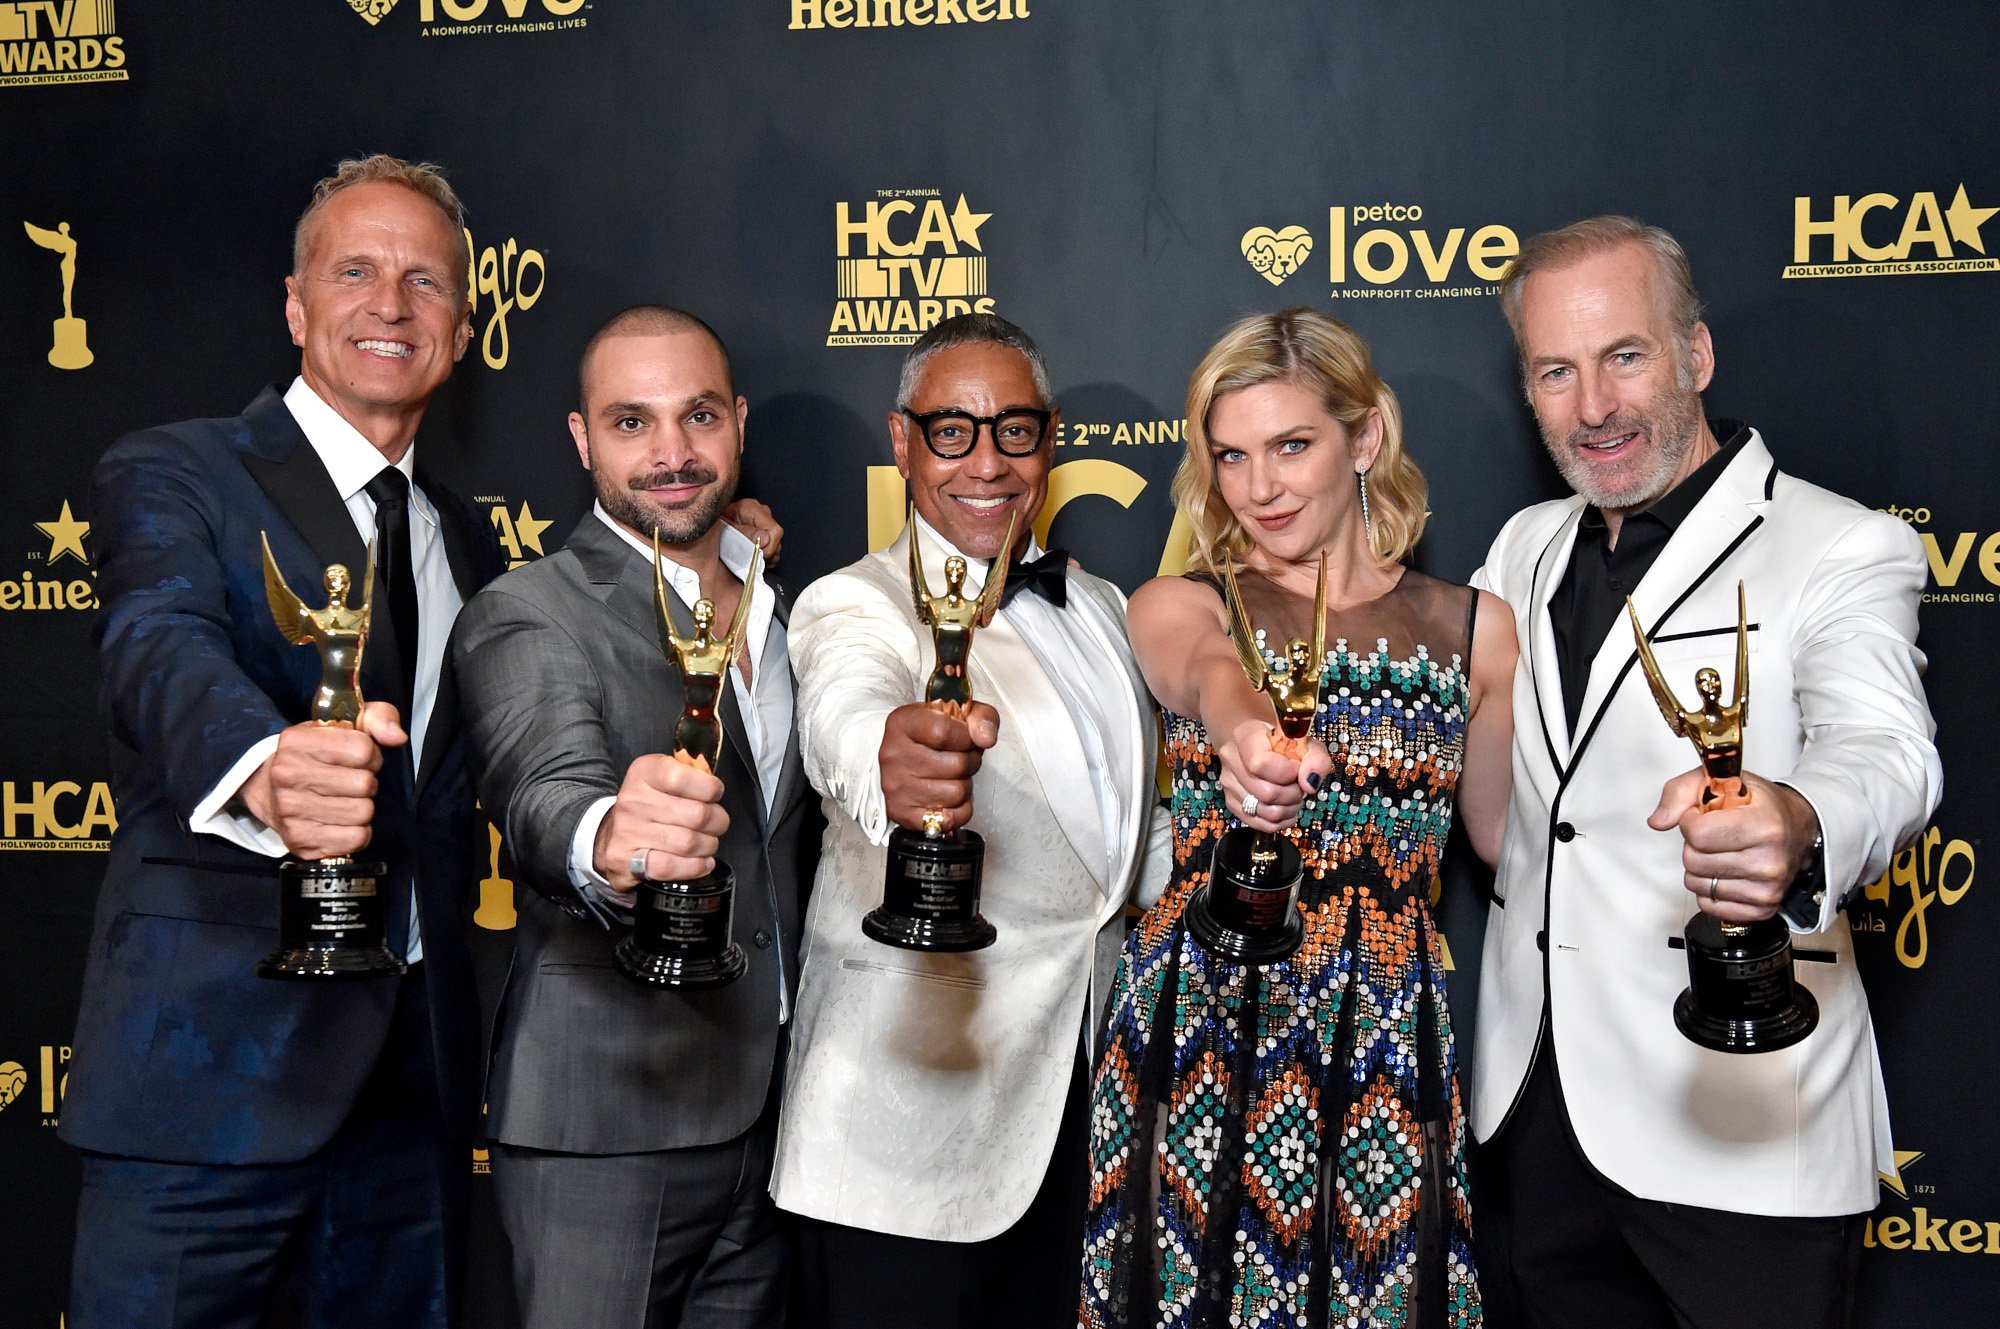 The cast of 'Better Call Saul,' including Patrick Fabian, Michael Mando, Giancarlo Esposito, Rhea Seehorn, and Bob Odenkirk. They're standing in a row and holding trophies out.